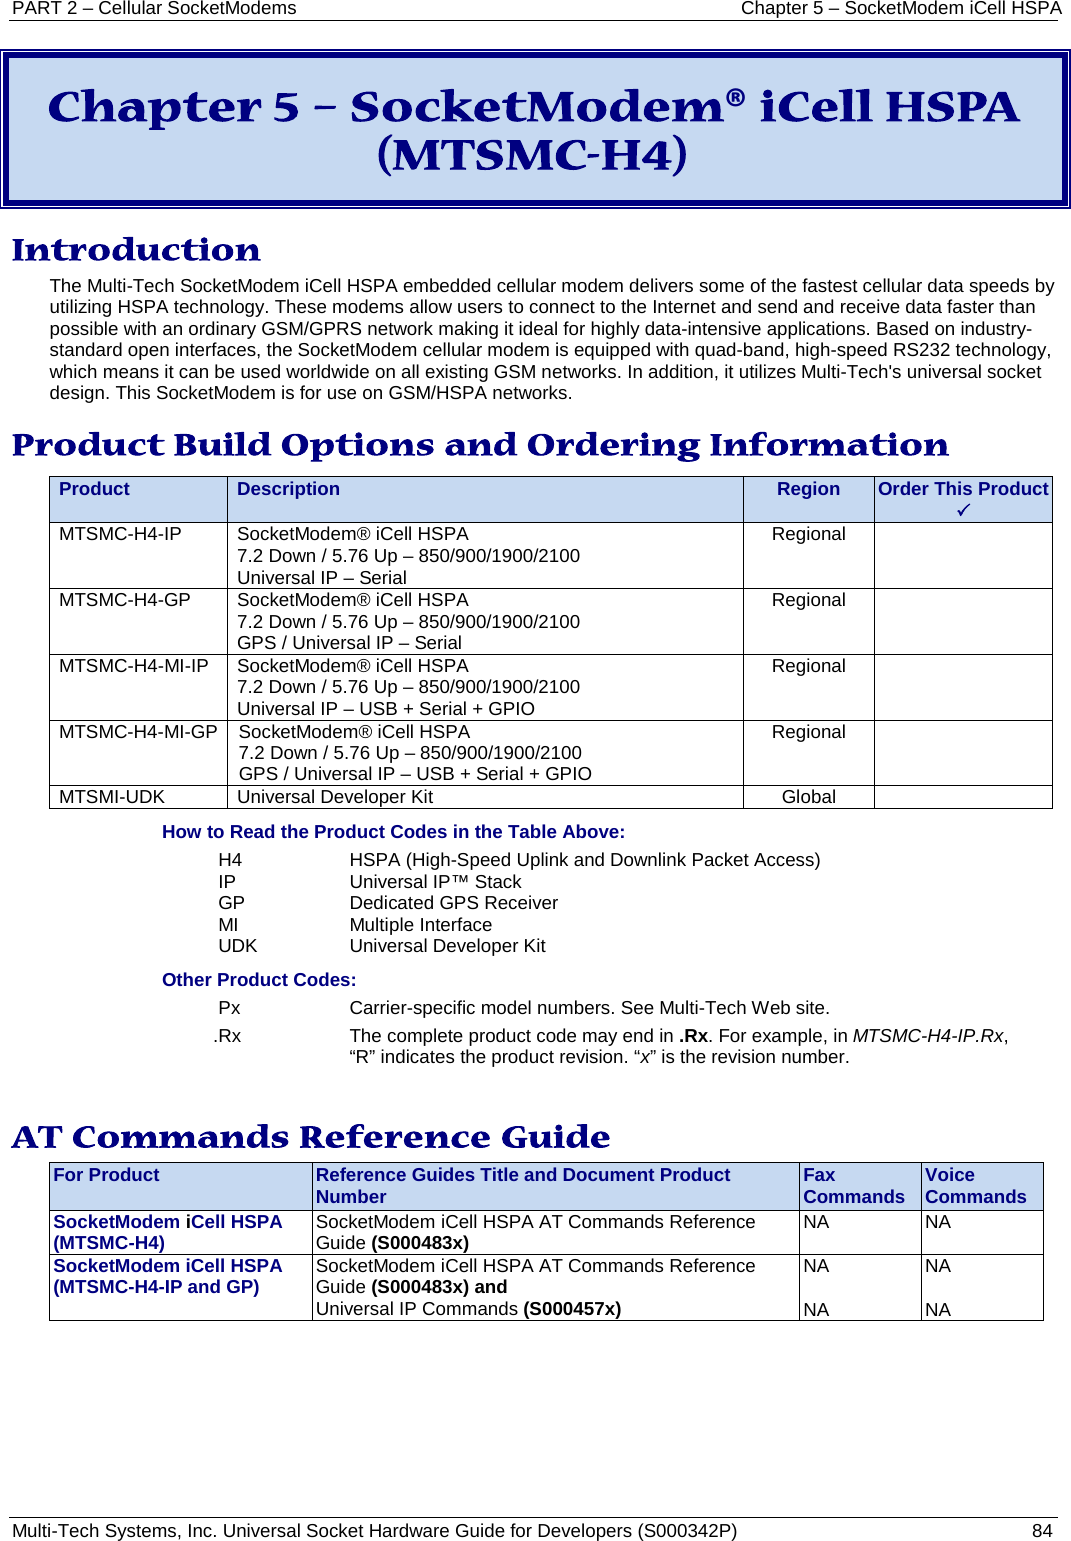 PART 2 – Cellular SocketModems Chapter 5 – SocketModem iCell HSPA Multi-Tech Systems, Inc. Universal Socket Hardware Guide for Developers (S000342P)  84  Chapter 5 – SocketModem® iCell HSPA (MTSMC-H4) Introduction The Multi-Tech SocketModem iCell HSPA embedded cellular modem delivers some of the fastest cellular data speeds by utilizing HSPA technology. These modems allow users to connect to the Internet and send and receive data faster than possible with an ordinary GSM/GPRS network making it ideal for highly data-intensive applications. Based on industry-standard open interfaces, the SocketModem cellular modem is equipped with quad-band, high-speed RS232 technology, which means it can be used worldwide on all existing GSM networks. In addition, it utilizes Multi-Tech&apos;s universal socket design. This SocketModem is for use on GSM/HSPA networks.  Product Build Options and Ordering Information Product Description Region Order This Product  MTSMC-H4-IP SocketModem® iCell HSPA  7.2 Down / 5.76 Up – 850/900/1900/2100 Universal IP – Serial Regional  MTSMC-H4-GP SocketModem® iCell HSPA  7.2 Down / 5.76 Up – 850/900/1900/2100 GPS / Universal IP – Serial Regional  MTSMC-H4-MI-IP SocketModem® iCell HSPA  7.2 Down / 5.76 Up – 850/900/1900/2100 Universal IP – USB + Serial + GPIO  Regional  MTSMC-H4-MI-GP SocketModem® iCell HSPA  7.2 Down / 5.76 Up – 850/900/1900/2100 GPS / Universal IP – USB + Serial + GPIO Regional   MTSMI-UDK Universal Developer Kit Global  How to Read the Product Codes in the Table Above: H4  HSPA (High-Speed Uplink and Downlink Packet Access) IP Universal IP™ Stack GP Dedicated GPS Receiver MI Multiple Interface UDK Universal Developer Kit Other Product Codes: Px  Carrier-specific model numbers. See Multi-Tech Web site. .Rx The complete product code may end in .Rx. For example, in MTSMC-H4-IP.Rx, “R” indicates the product revision. “x” is the revision number.  AT Commands Reference Guide For Product Reference Guides Title and Document Product Number Fax Commands Voice Commands SocketModem iCell HSPA (MTSMC-H4) SocketModem iCell HSPA AT Commands Reference Guide (S000483x) NA NA SocketModem iCell HSPA (MTSMC-H4-IP and GP) SocketModem iCell HSPA AT Commands Reference Guide (S000483x) and Universal IP Commands (S000457x) NA  NA NA  NA    